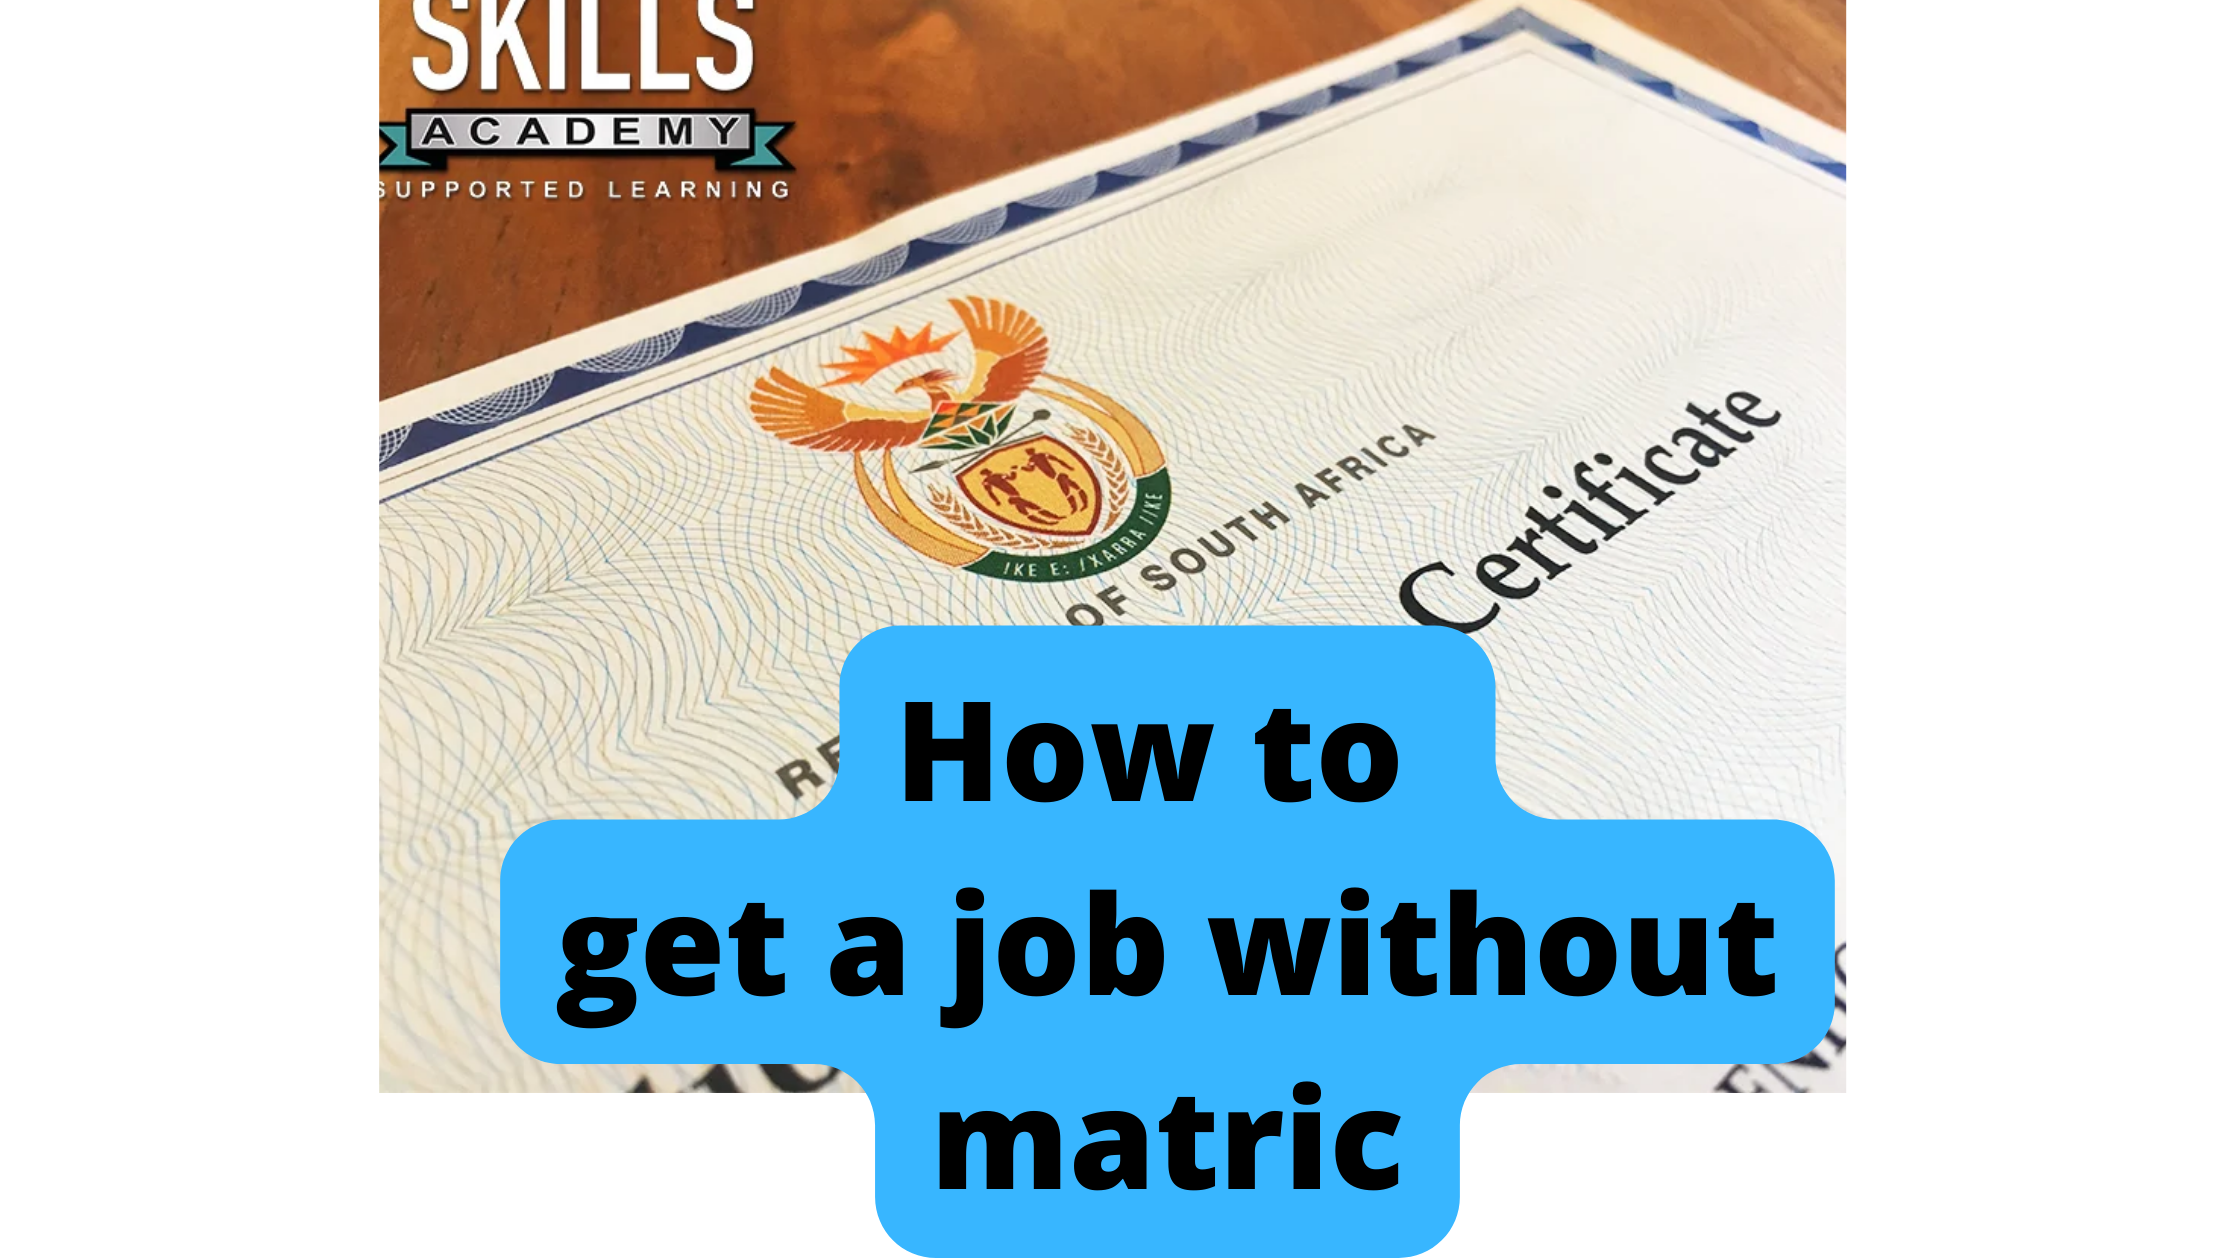 How to get a job without matric